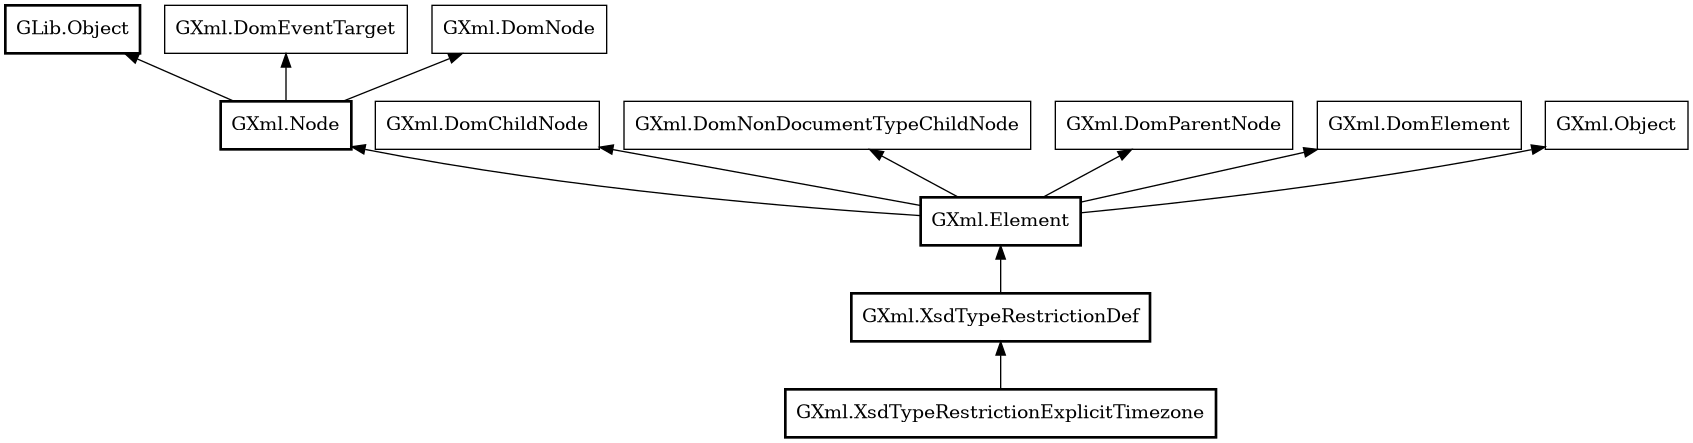 Object hierarchy for XsdTypeRestrictionExplicitTimezone